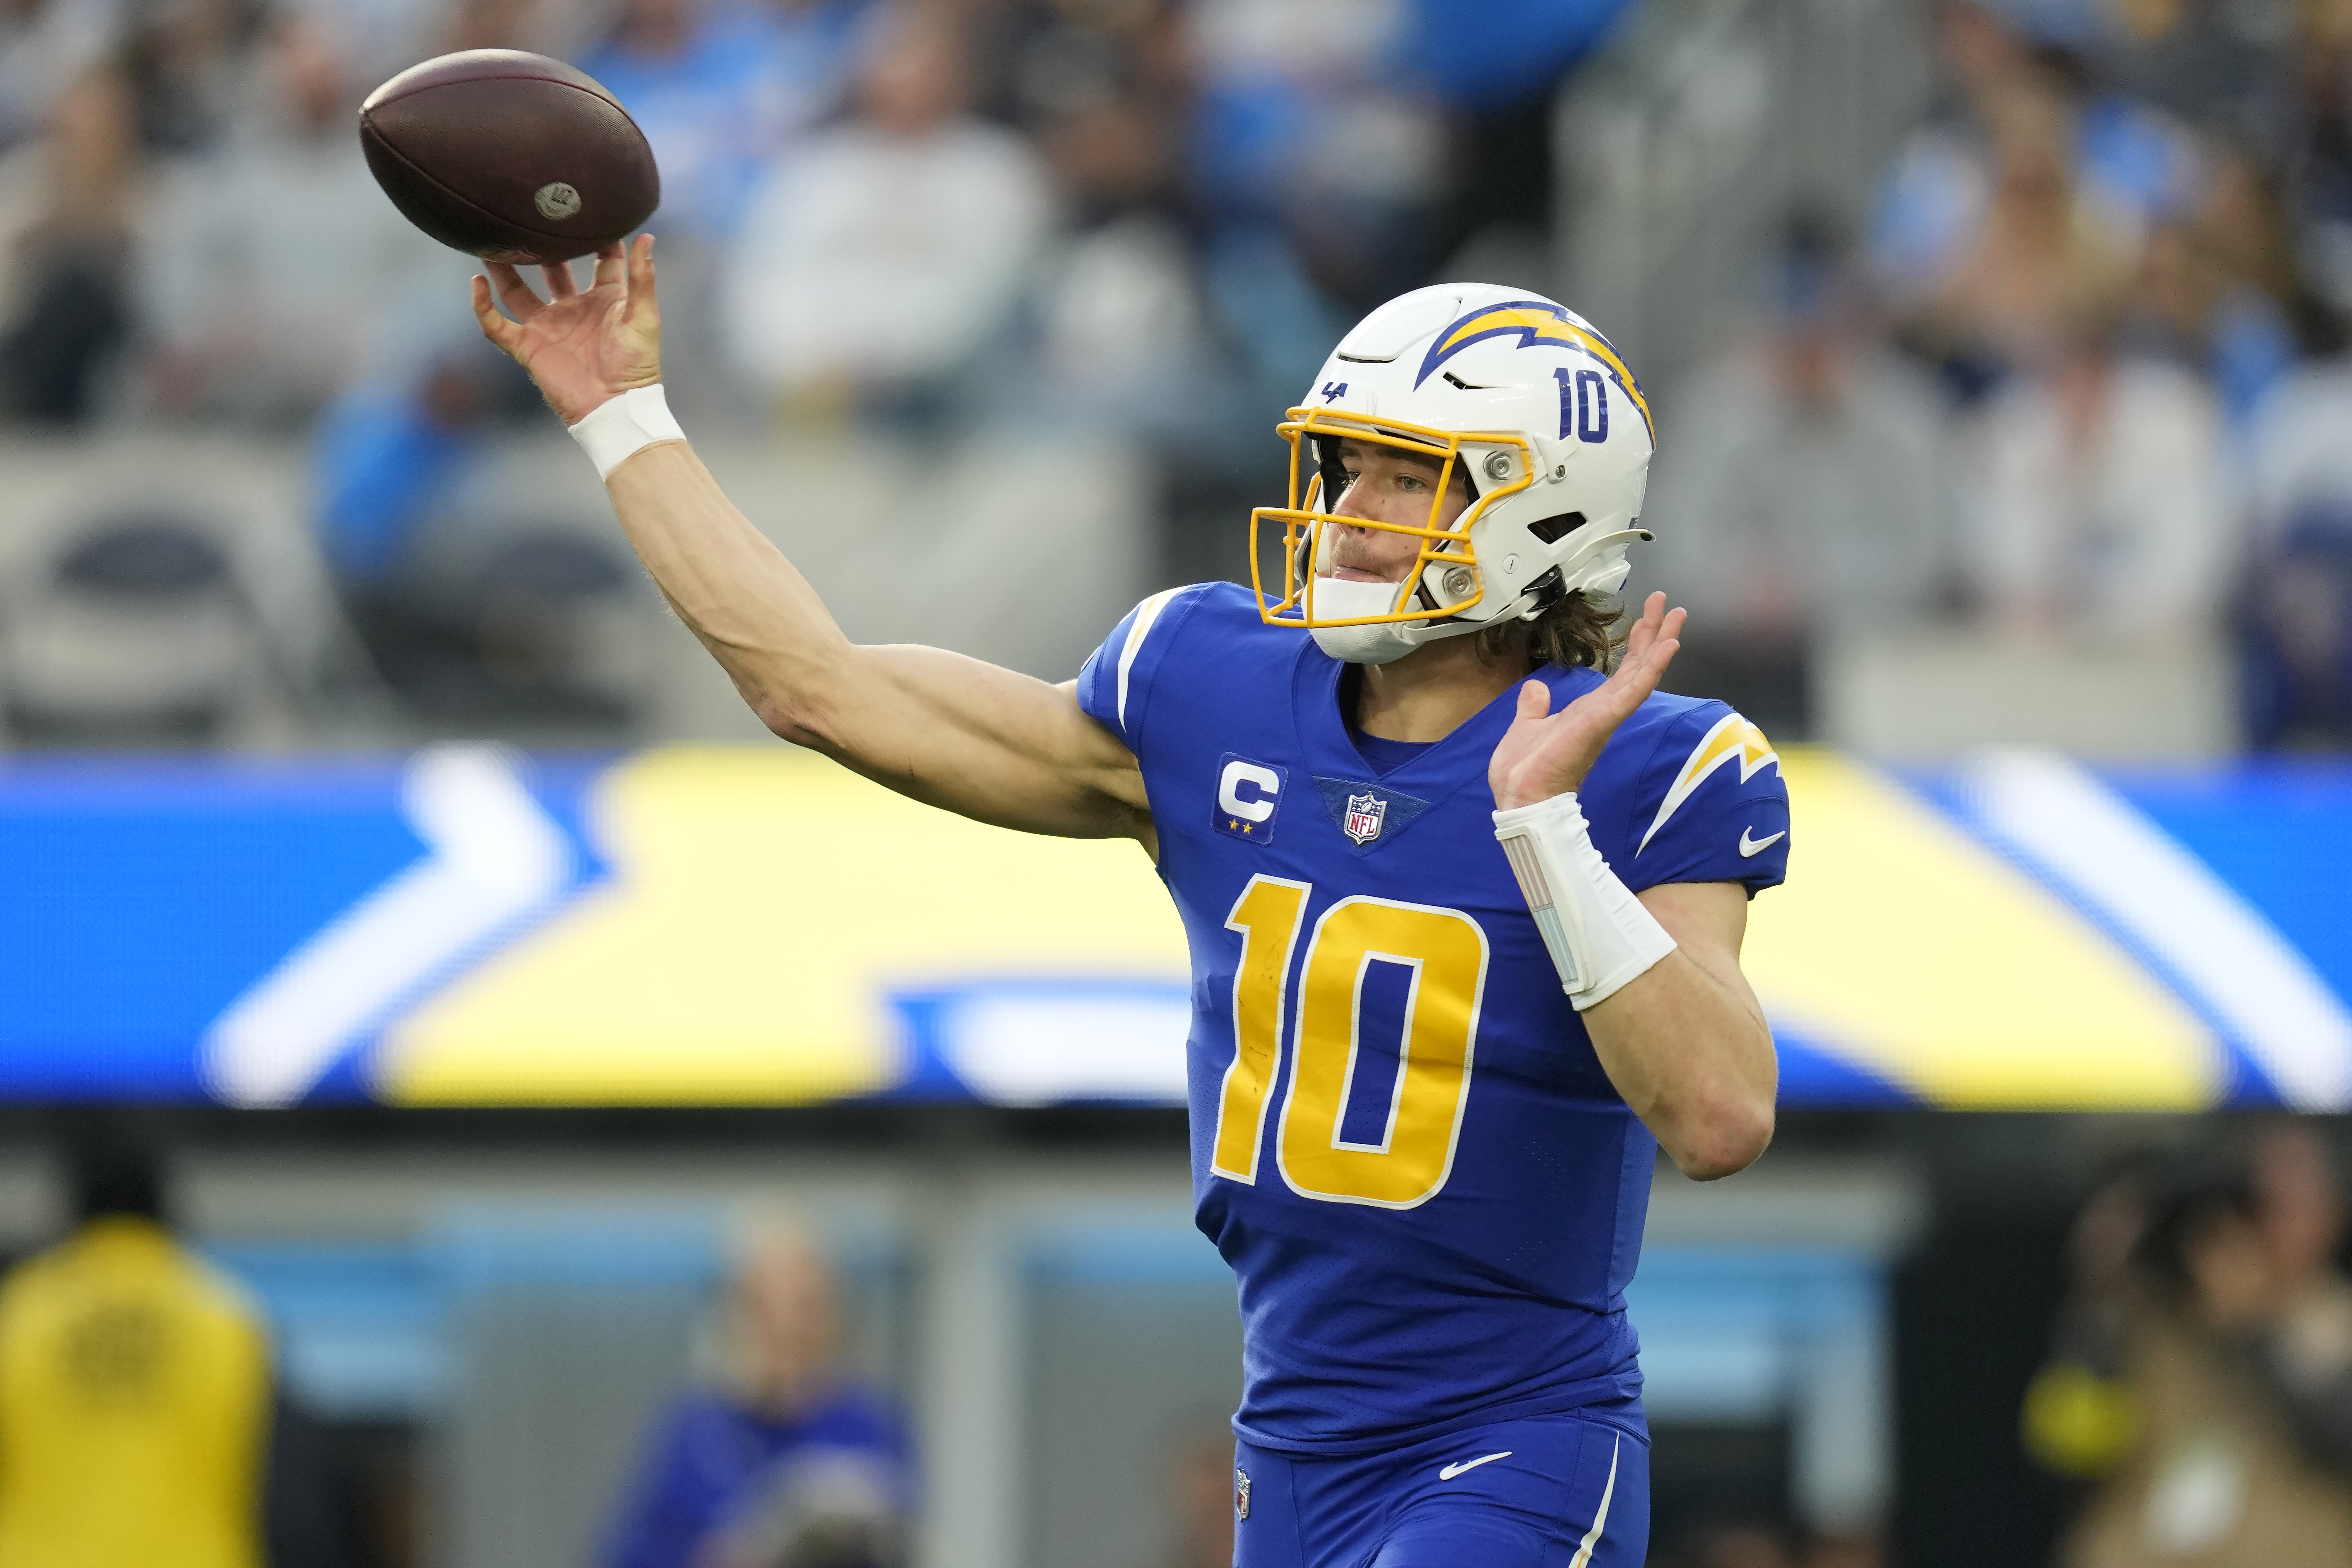 Los Angeles Chargers: QB Justin Herbert details injuries in 2022